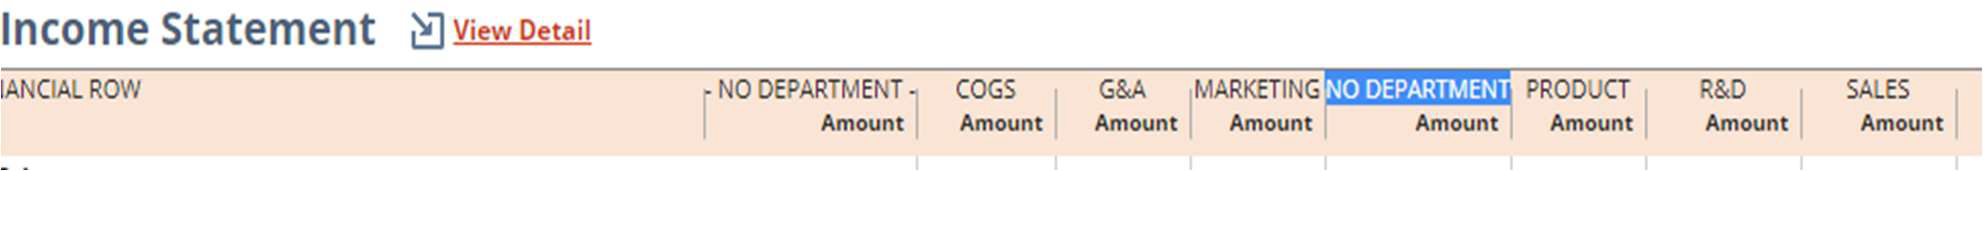 Example of an Income Statement.